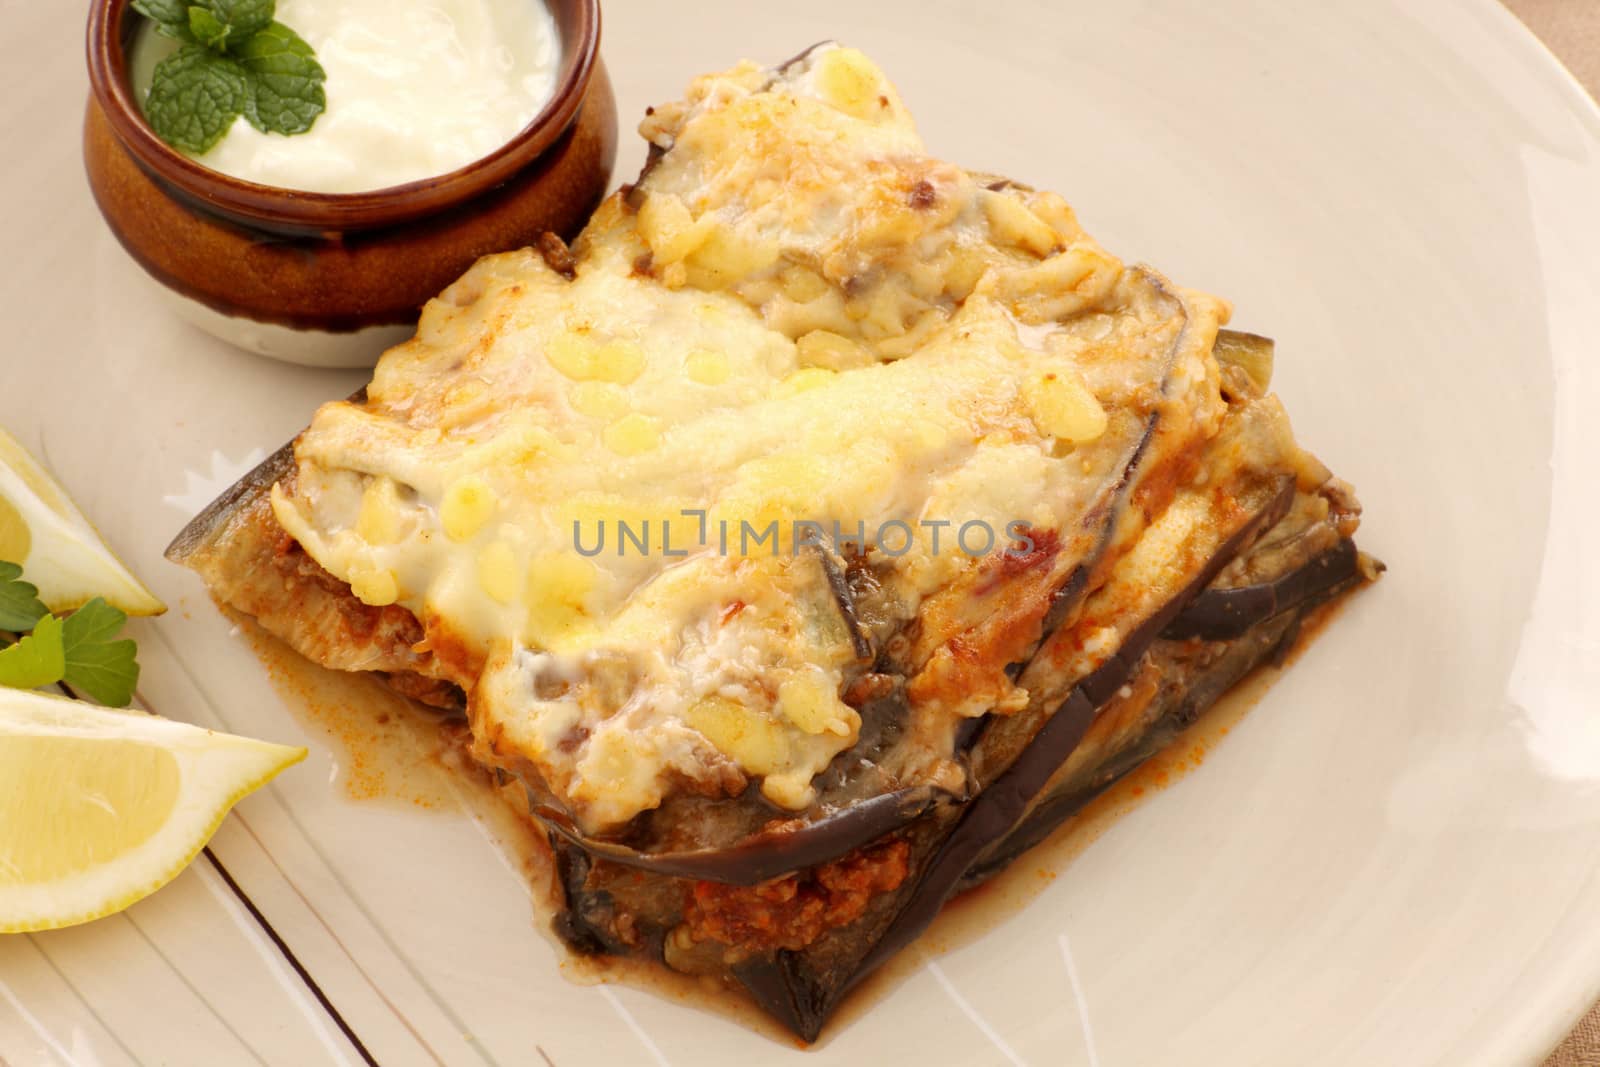 Delicious Greek moussaka with aubergine and yoghurt.